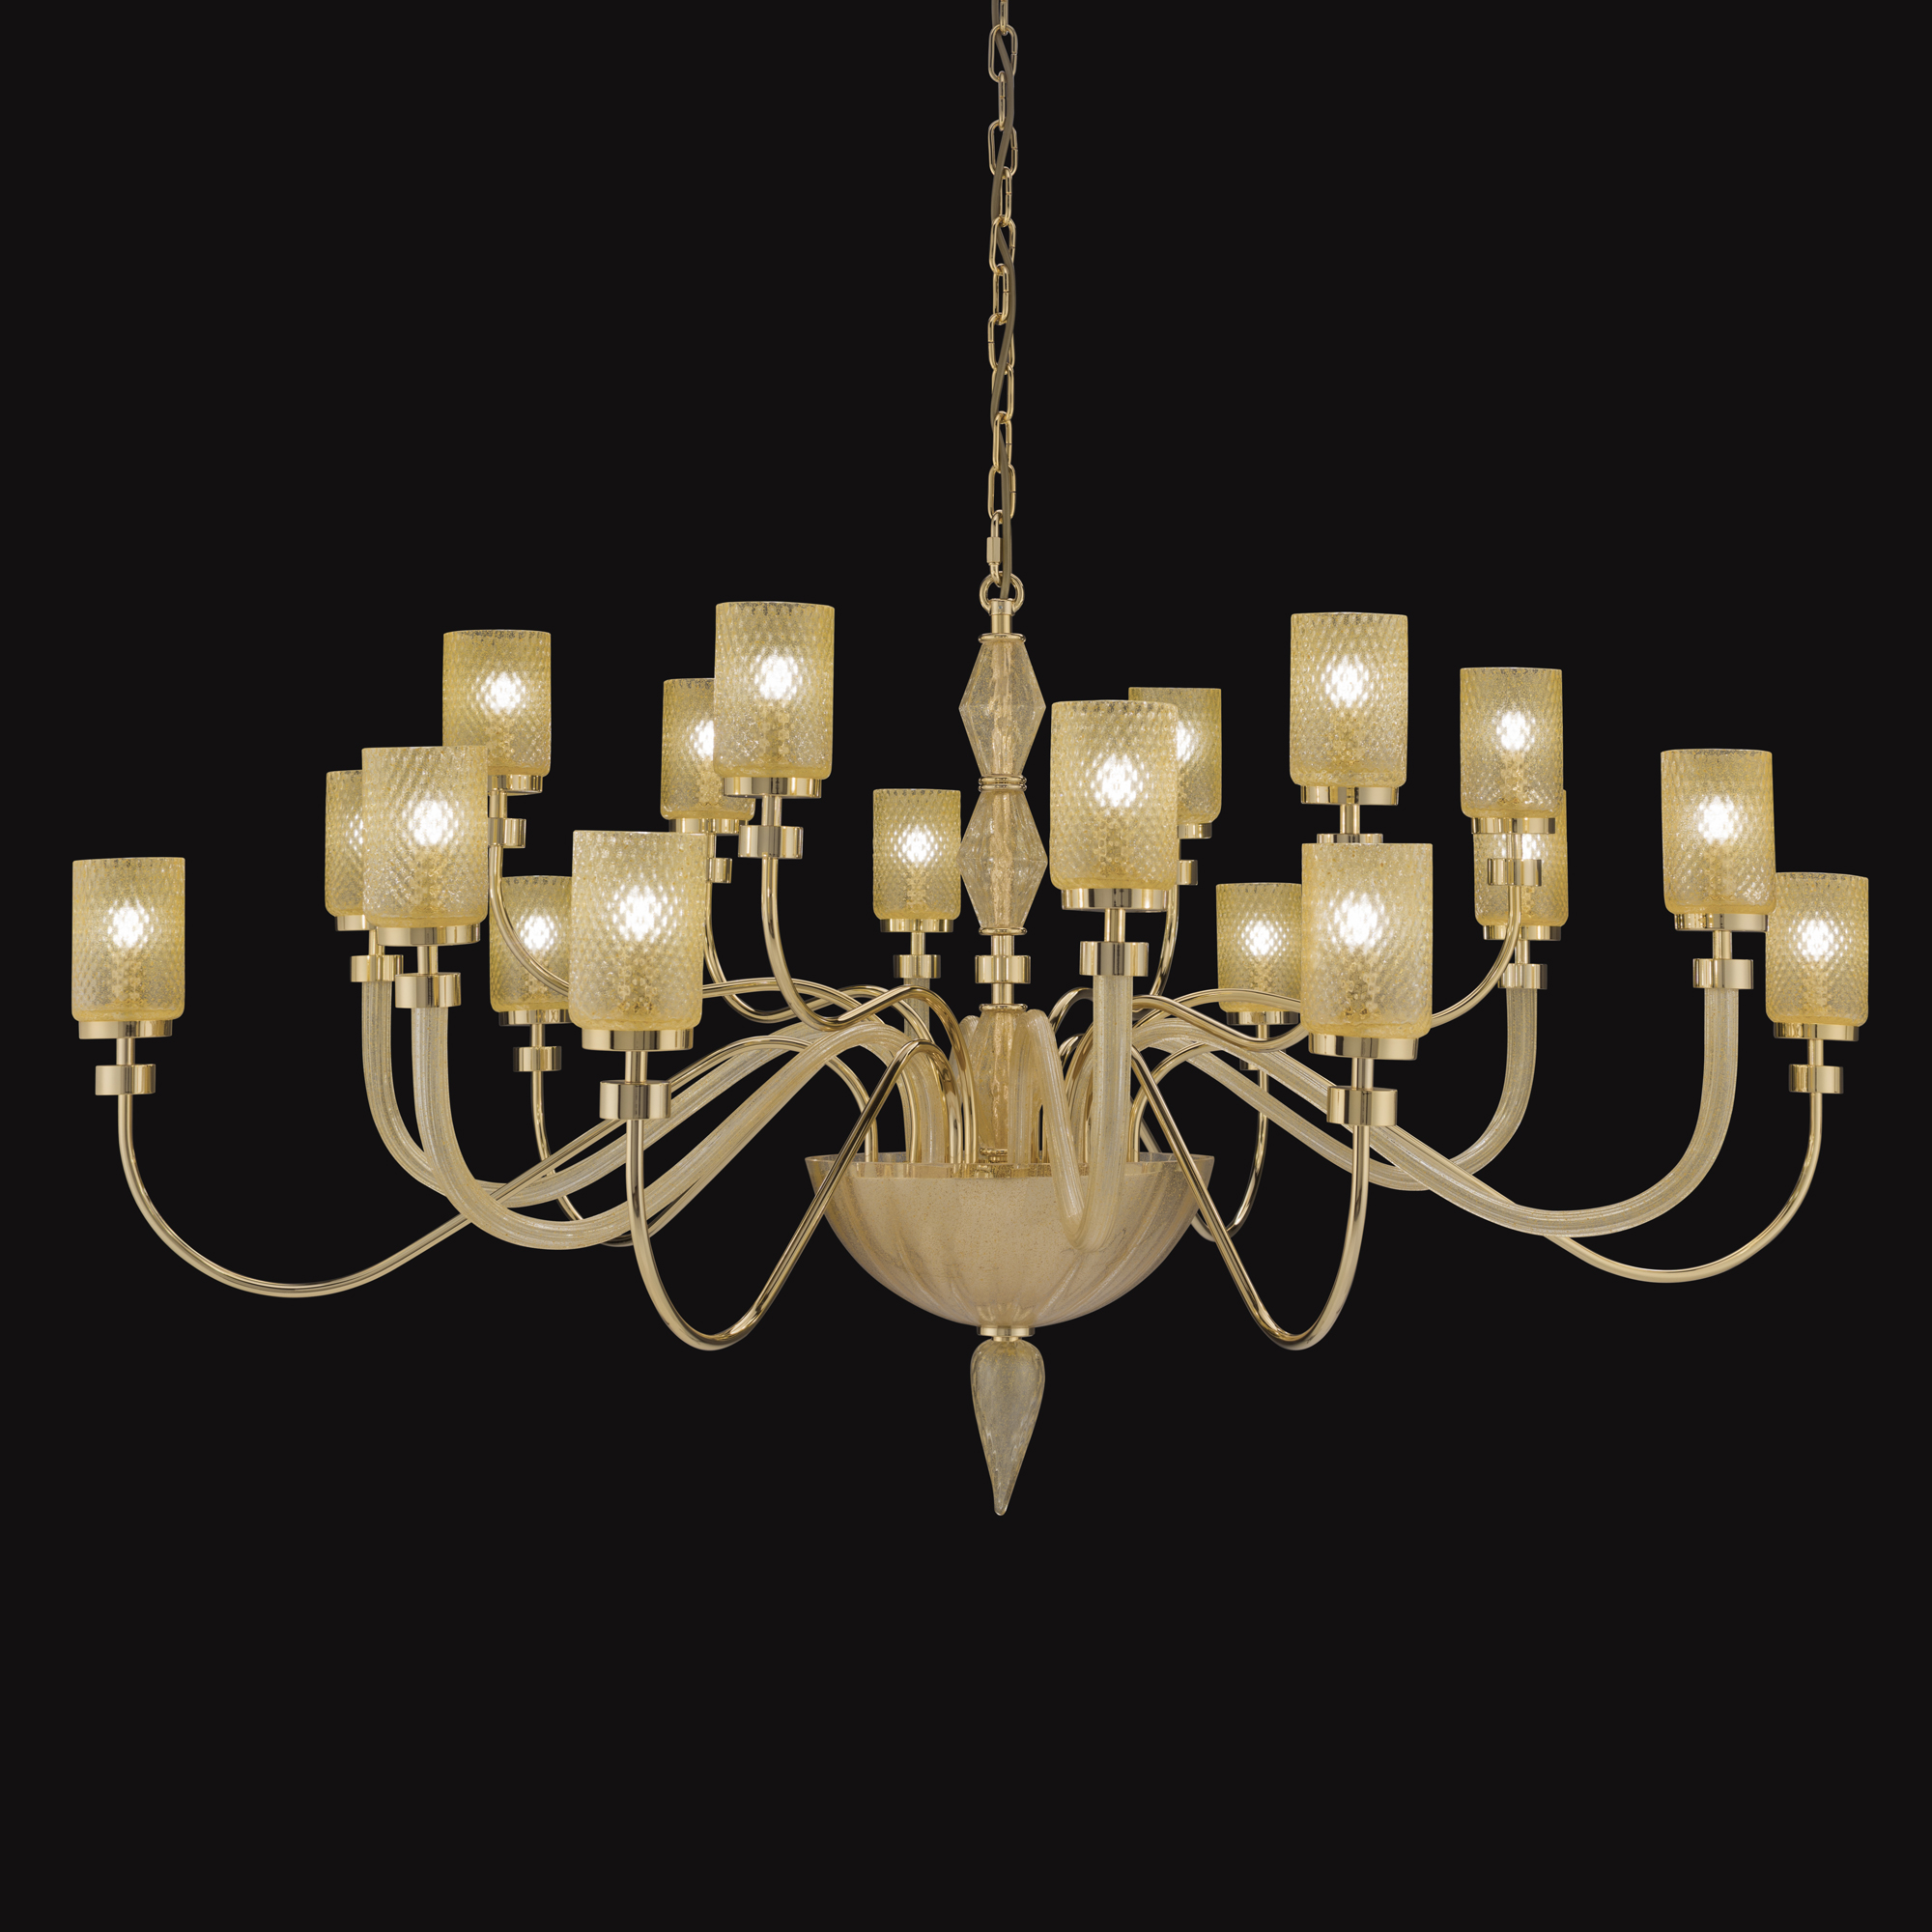 Large Chandelier With Balloton Effect Glass Shades